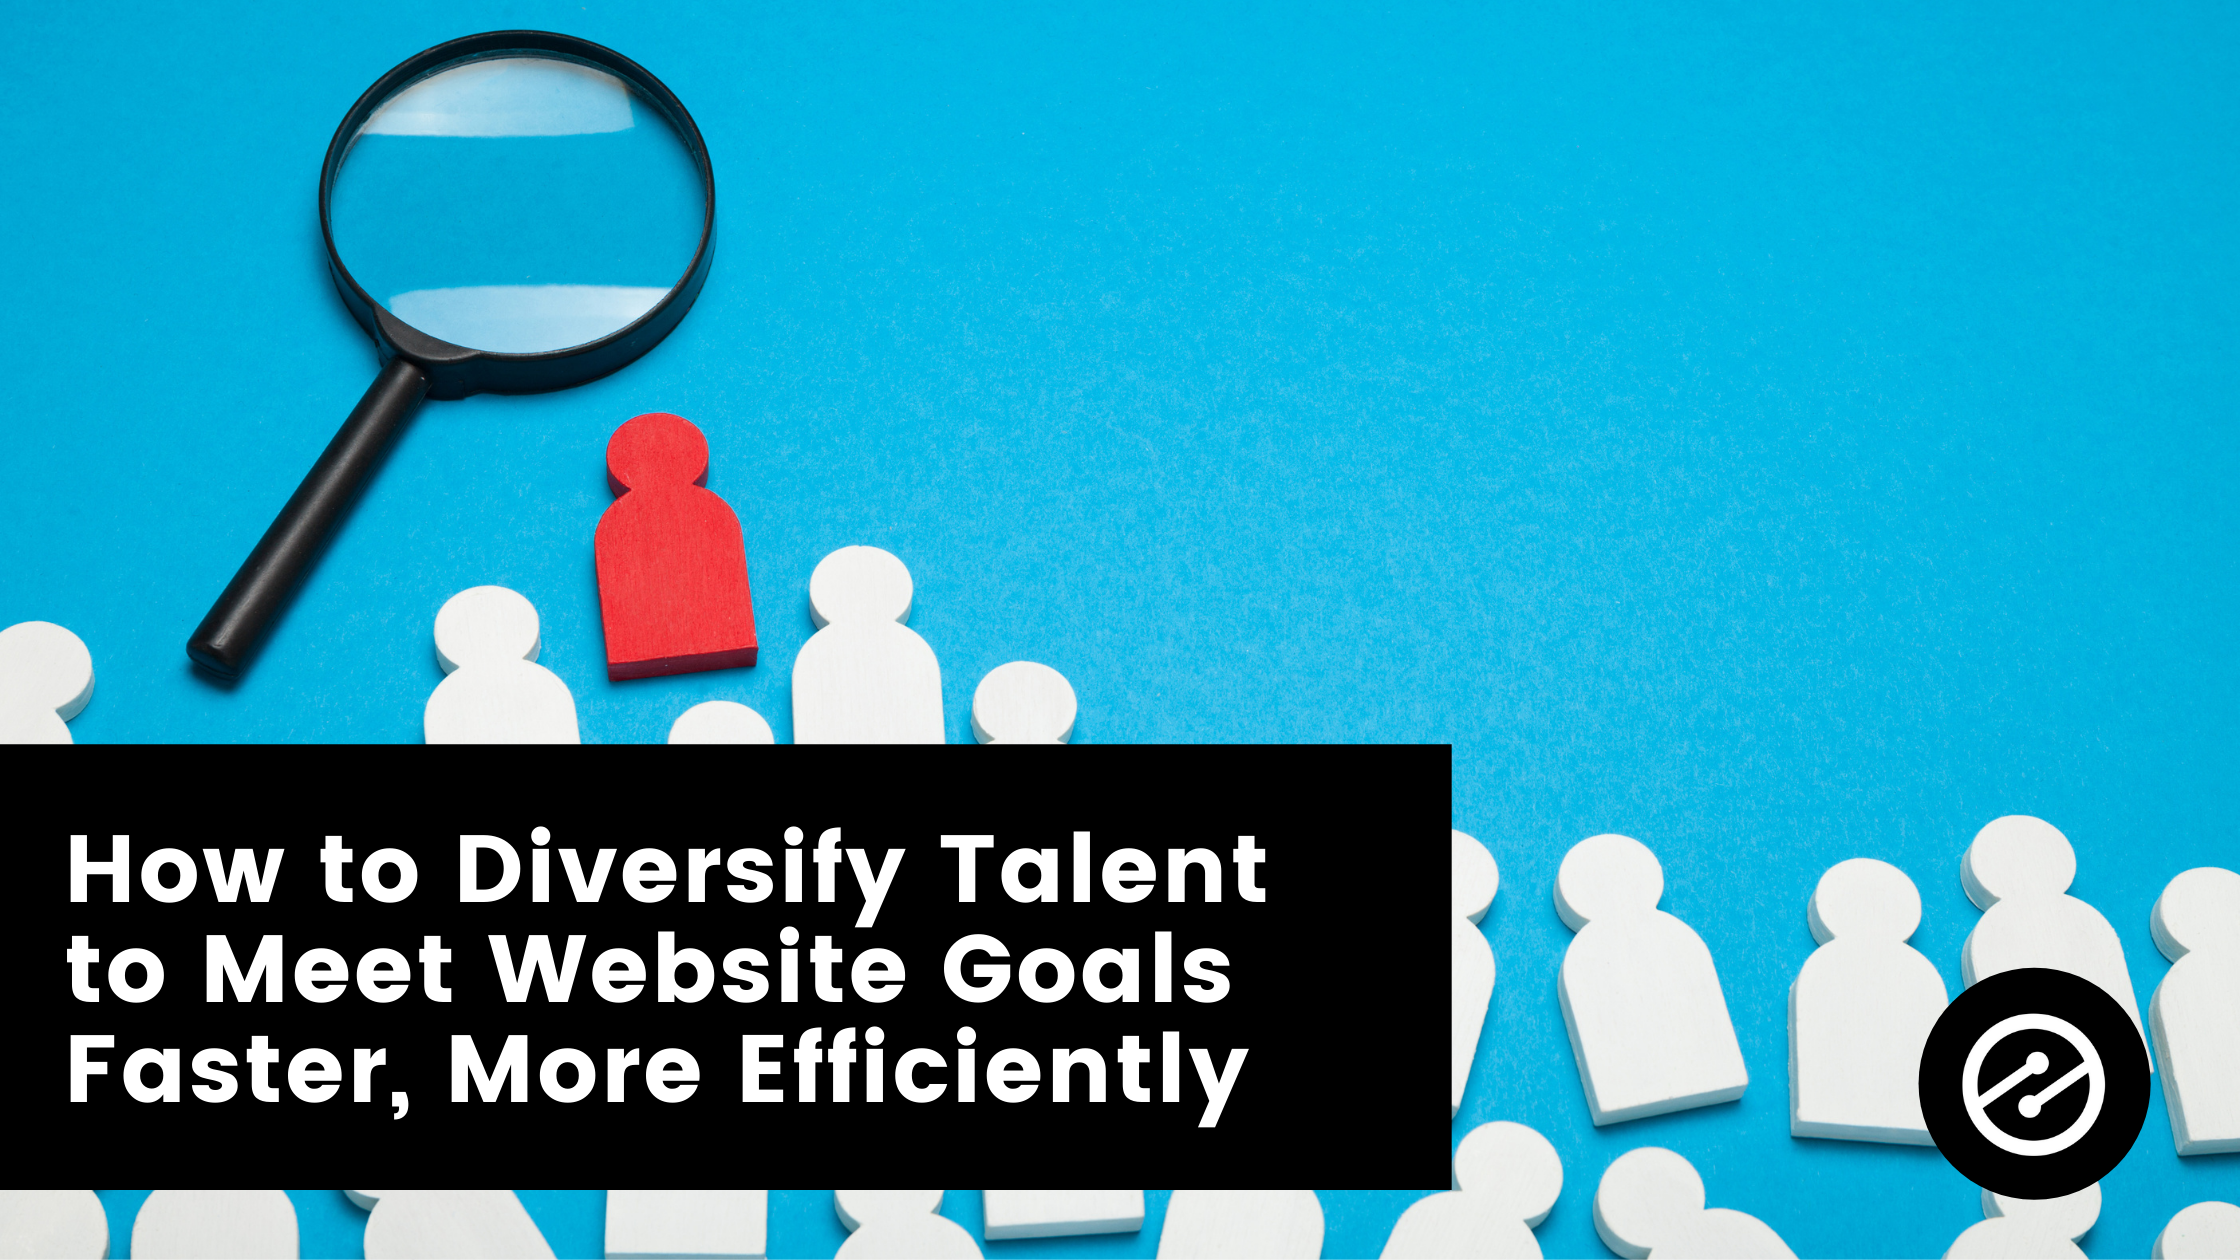 How to Diversify Talent to Meet Website Goals Faster, More Efficiently 